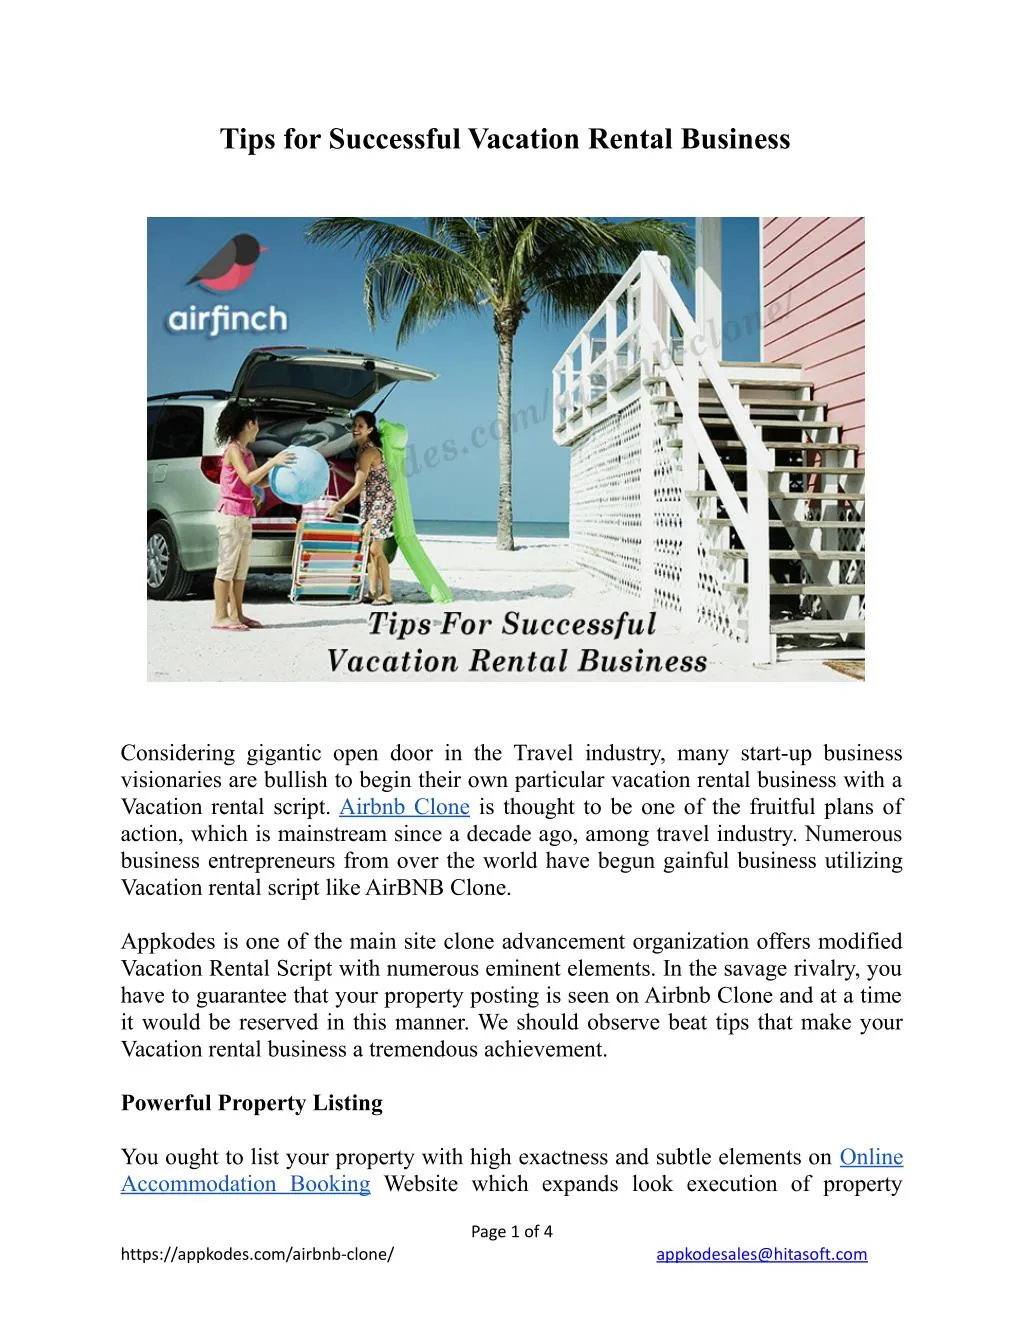 tips for successful vacation rental business